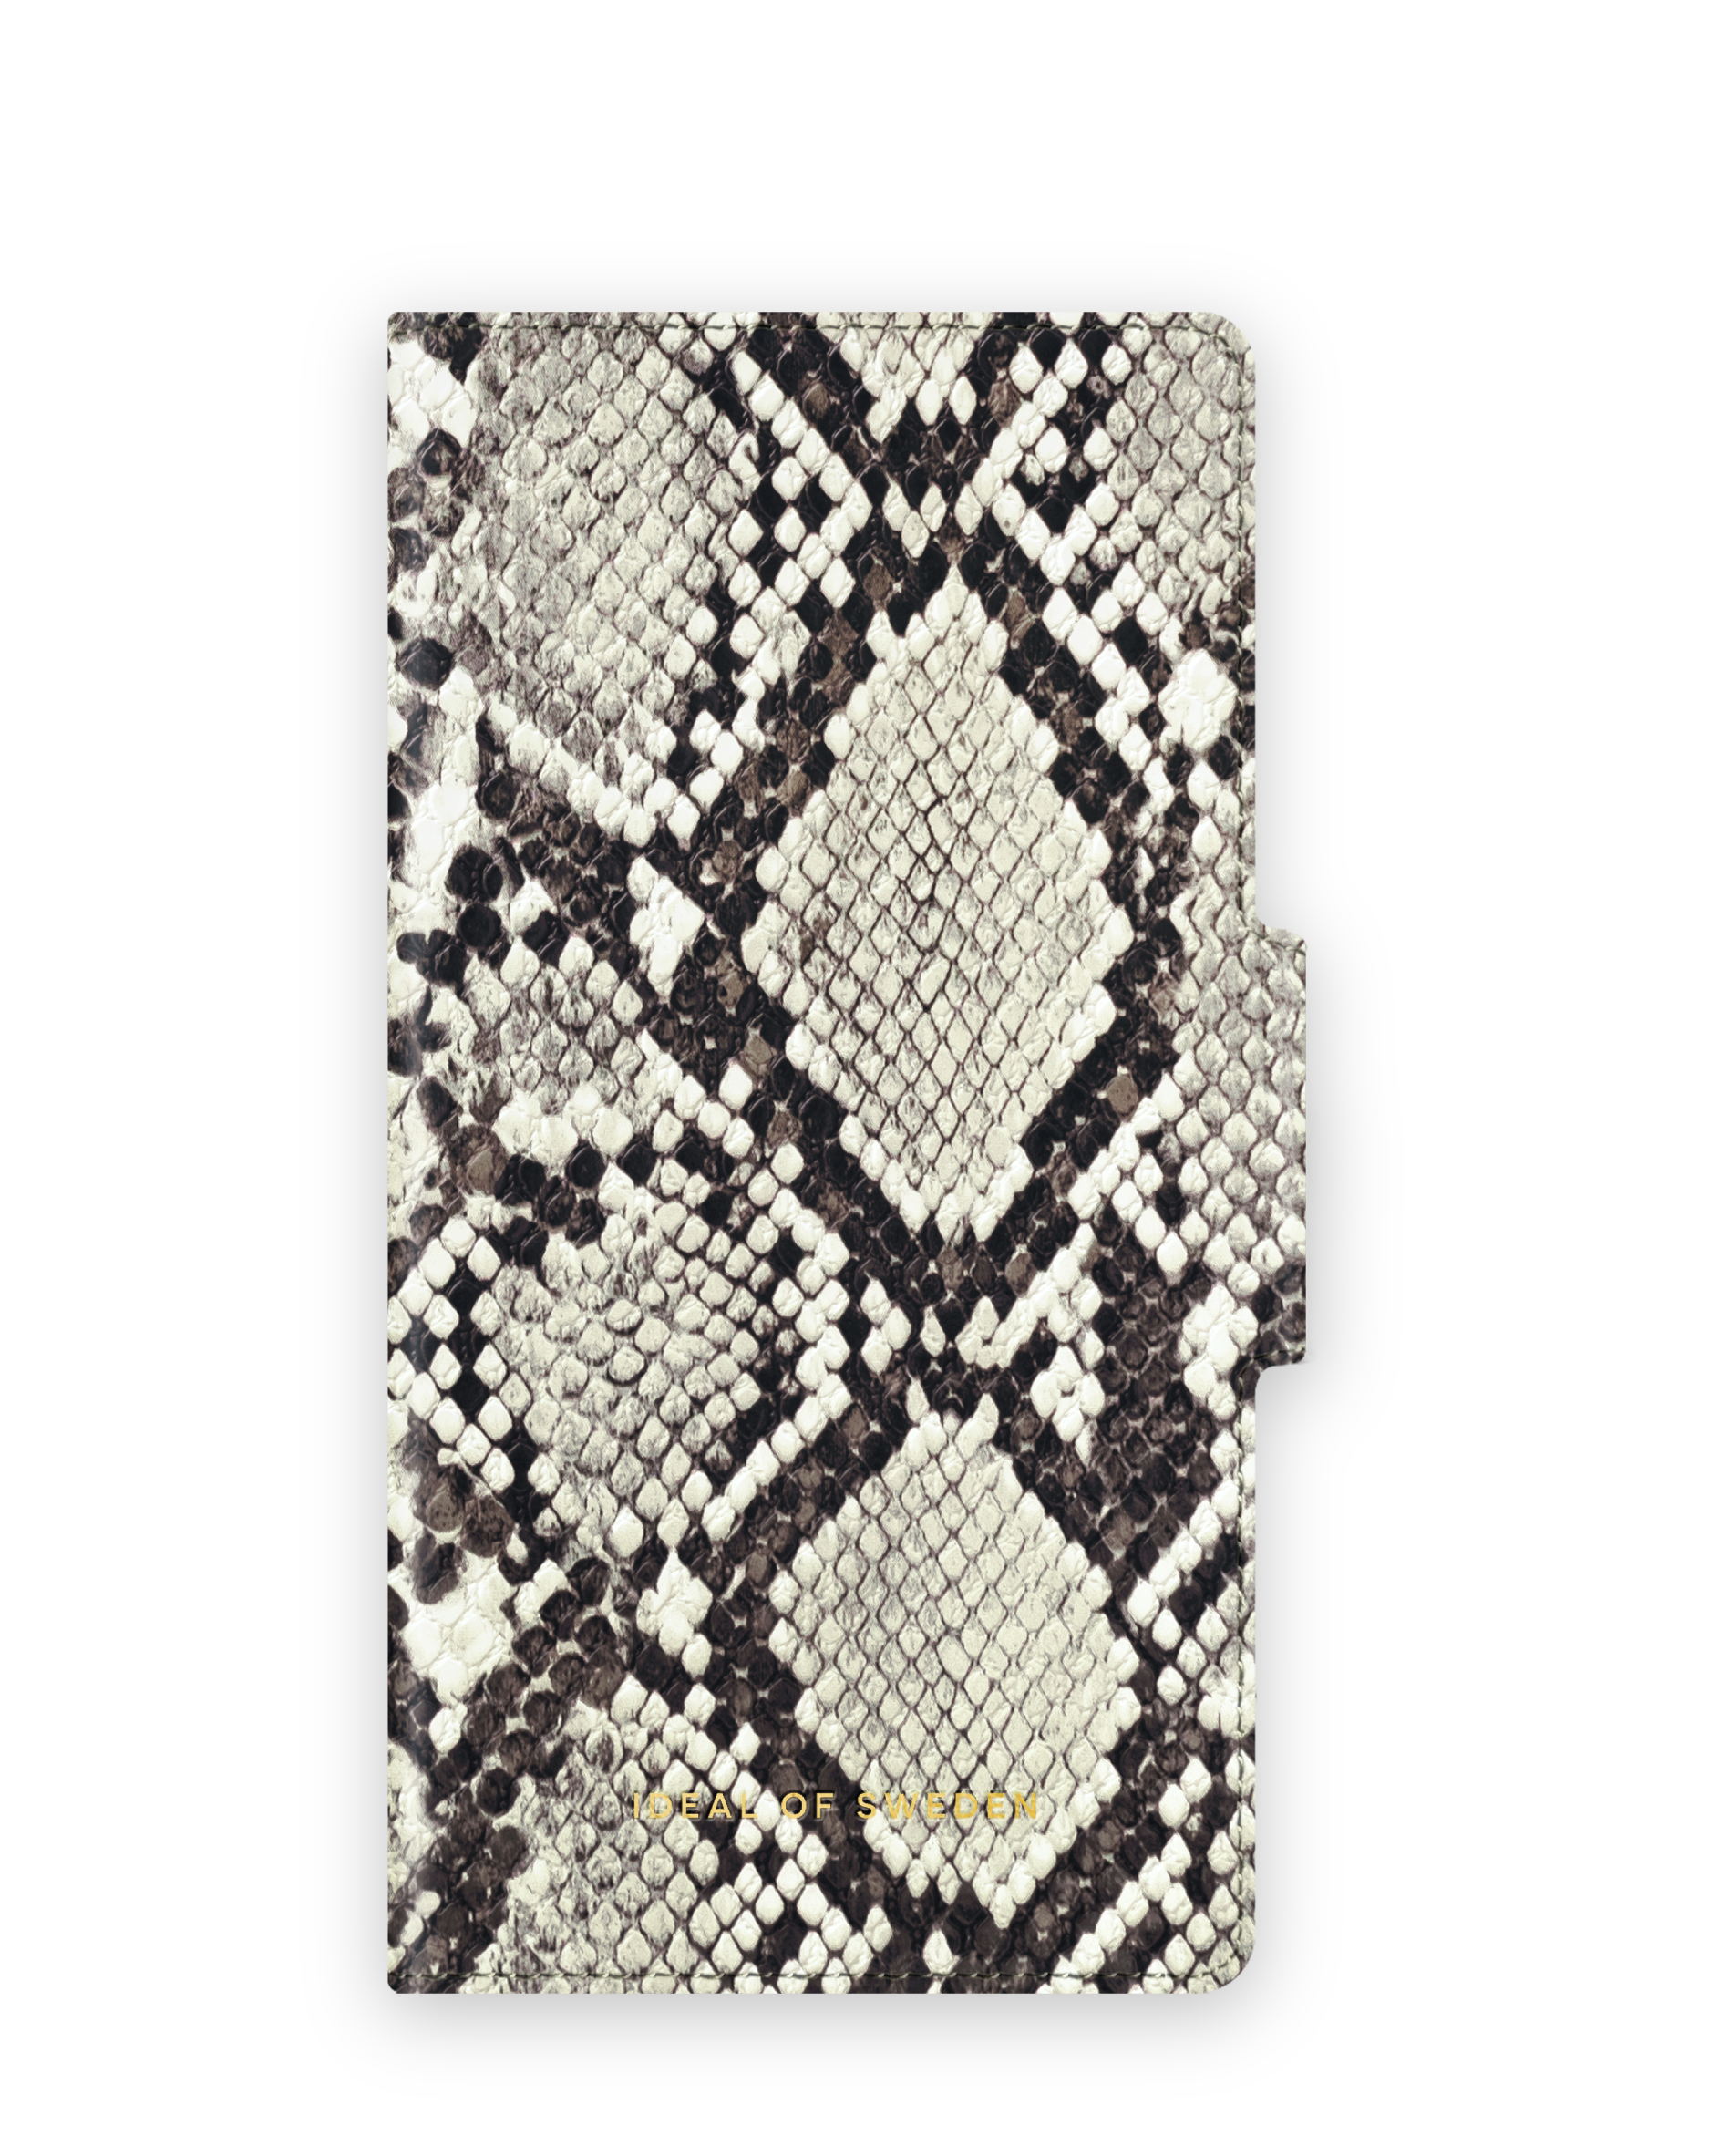 IDEAL OF SWEDEN IDAW-I2061-231, Bookcover, 12 Eternal iPhone Apple Snake Pro, 12, Apple, Apple iPhone